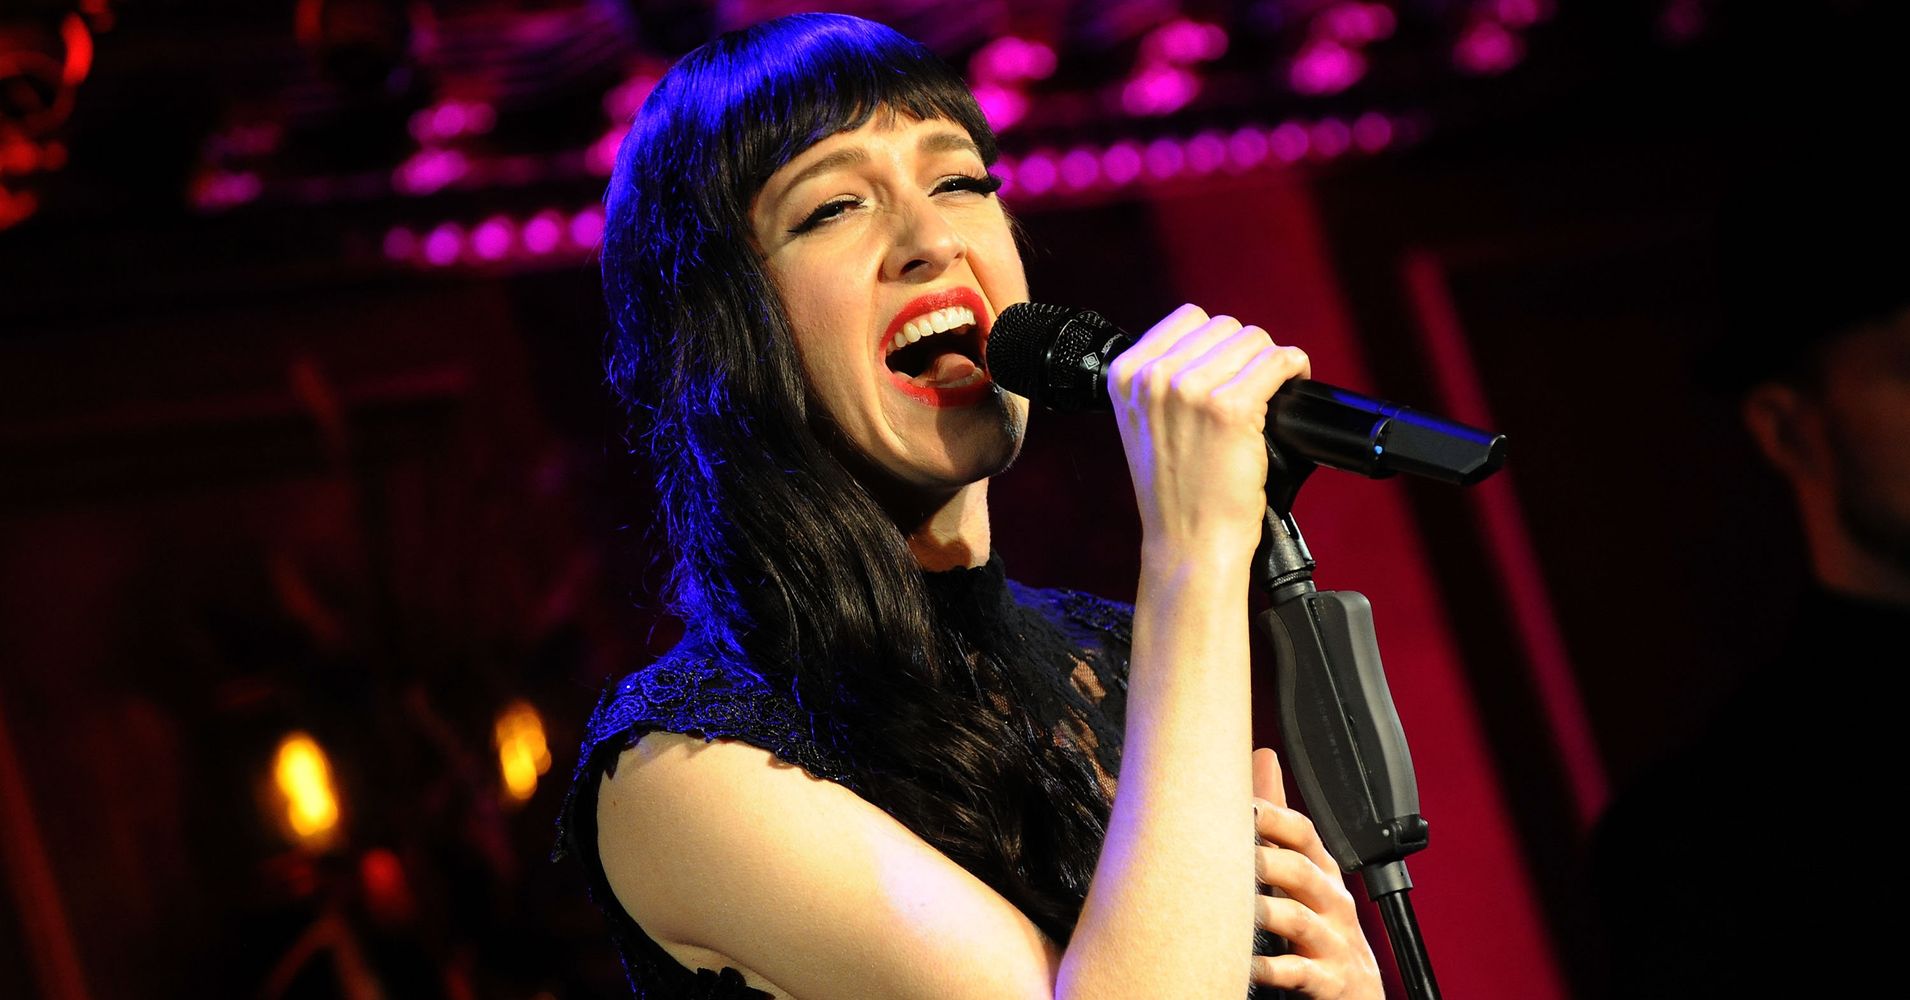 In Her Latest Show Hedwig Star Lena Hall Just Wants To Live Her